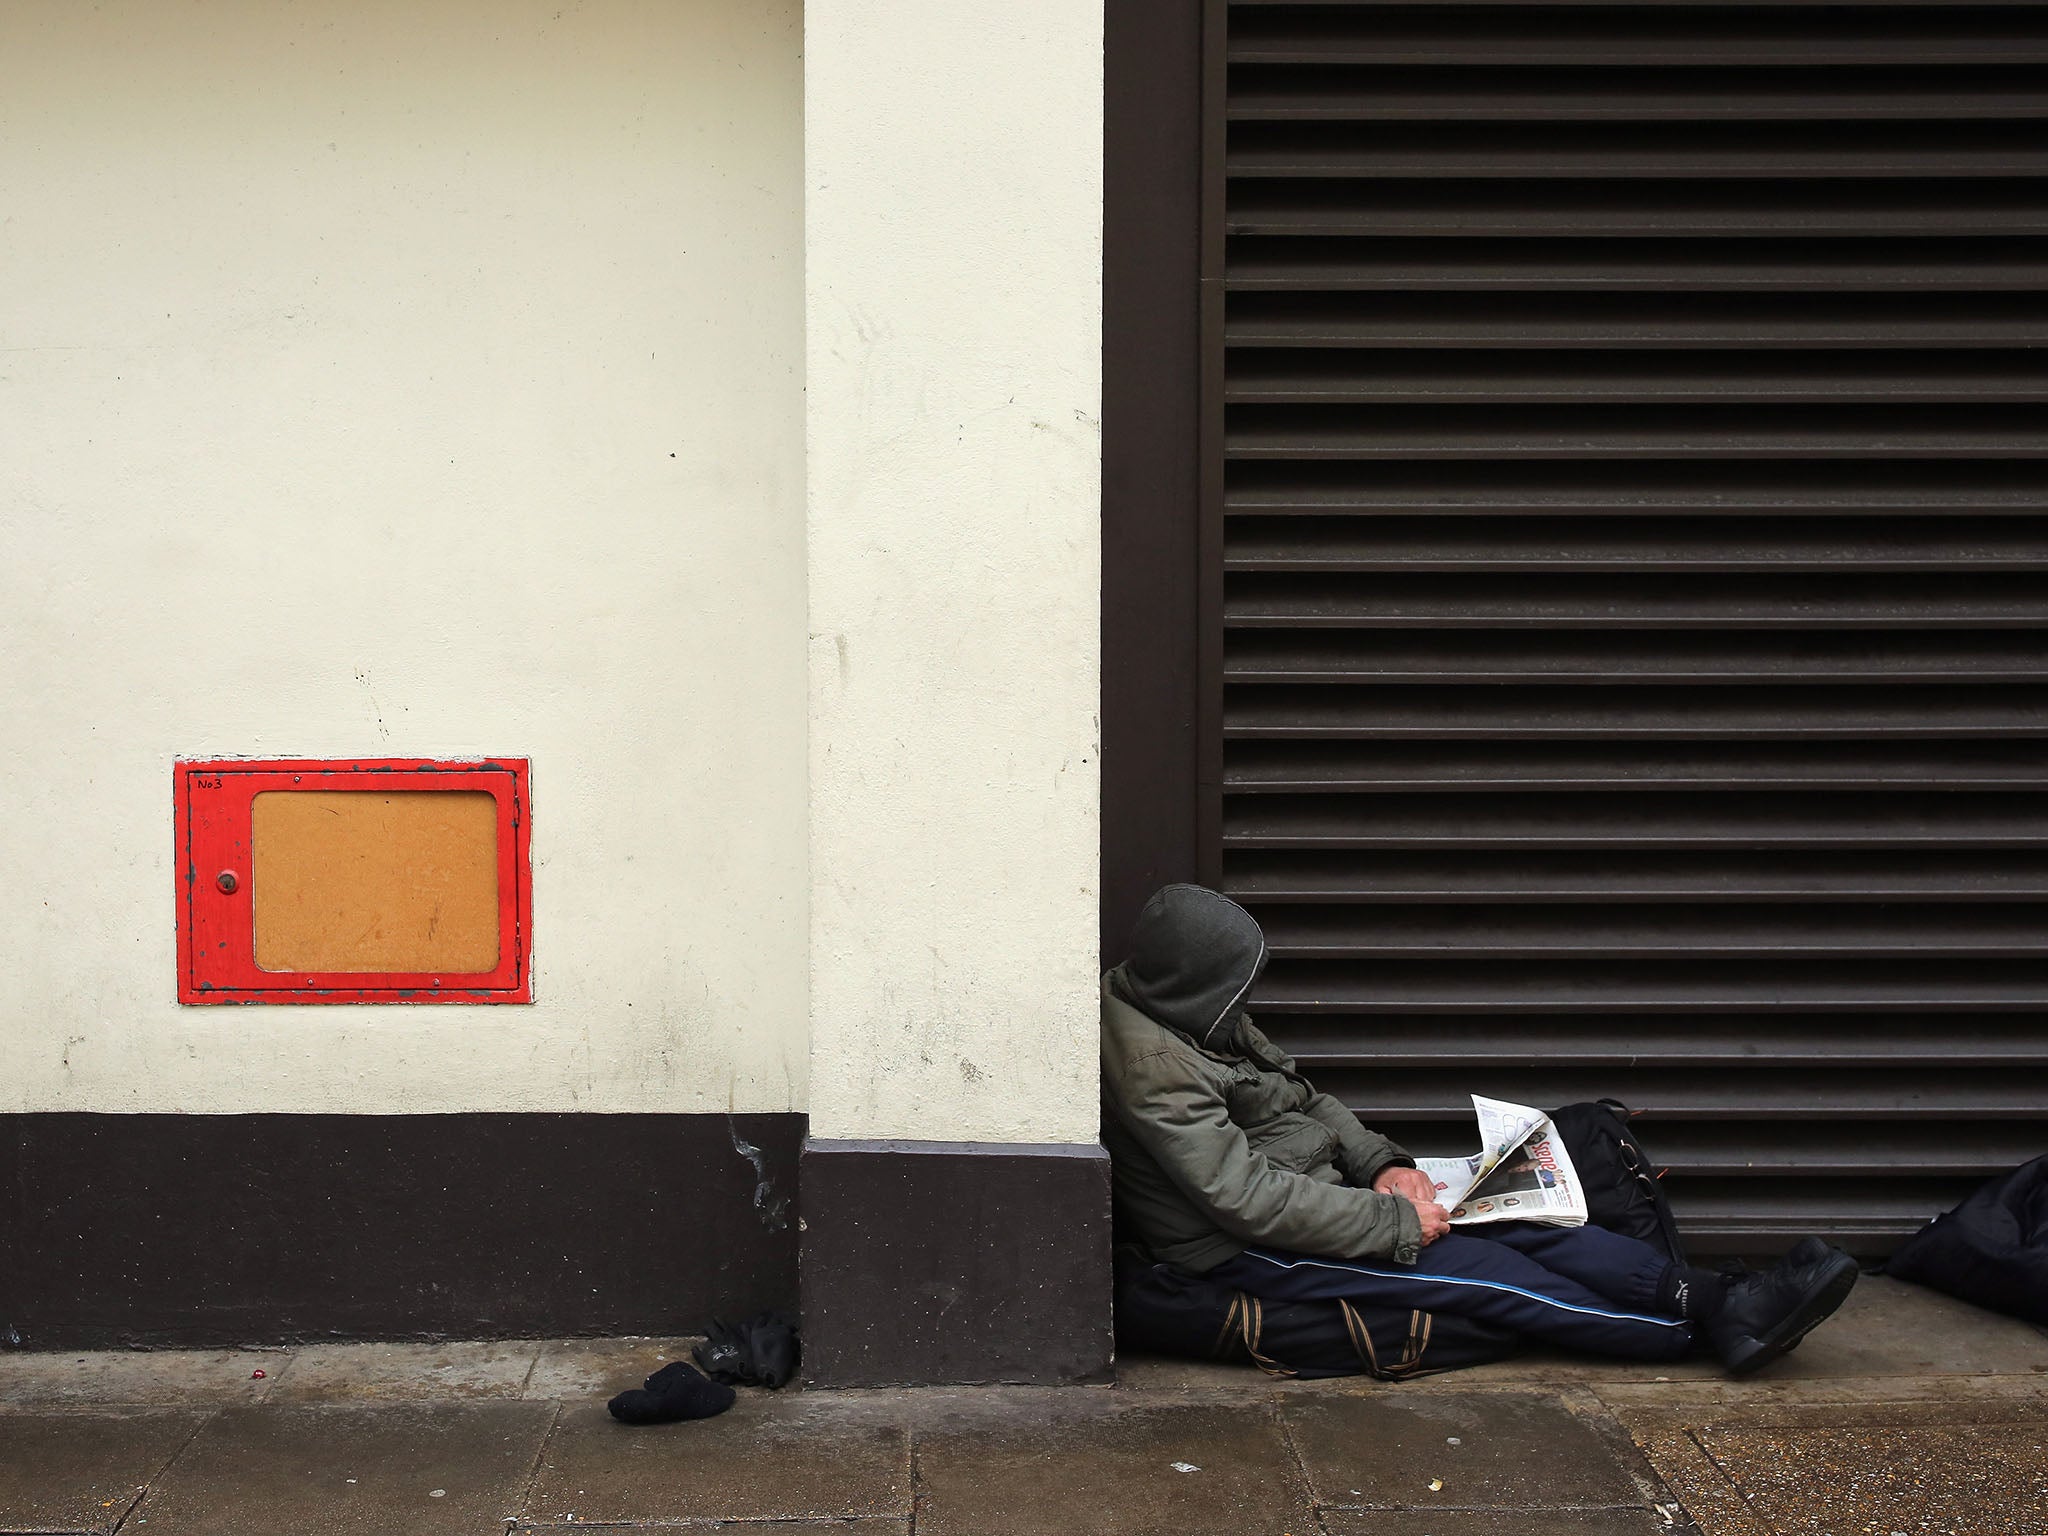 Many 18 to 21 year-olds are ‘at significant risk’ of homelessness, the report warns